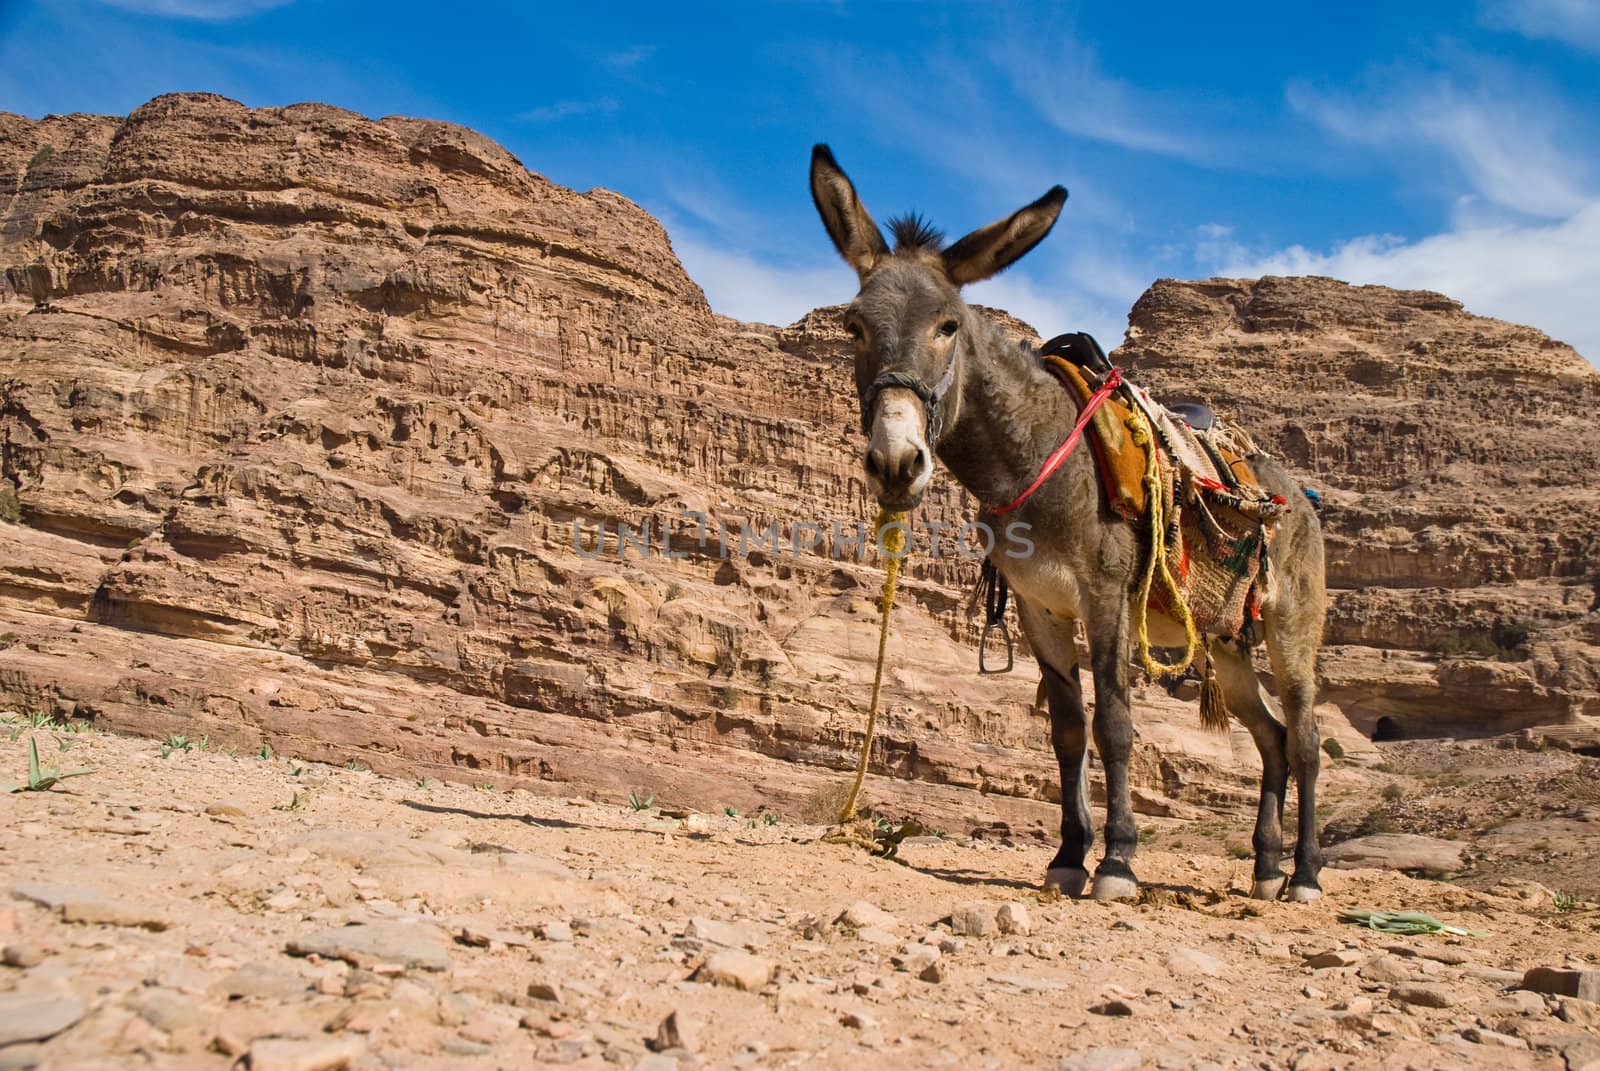 A donkey looking down at me in the mountain. Waiting to take a tourist down from the Monastry in Petra, Jordan.